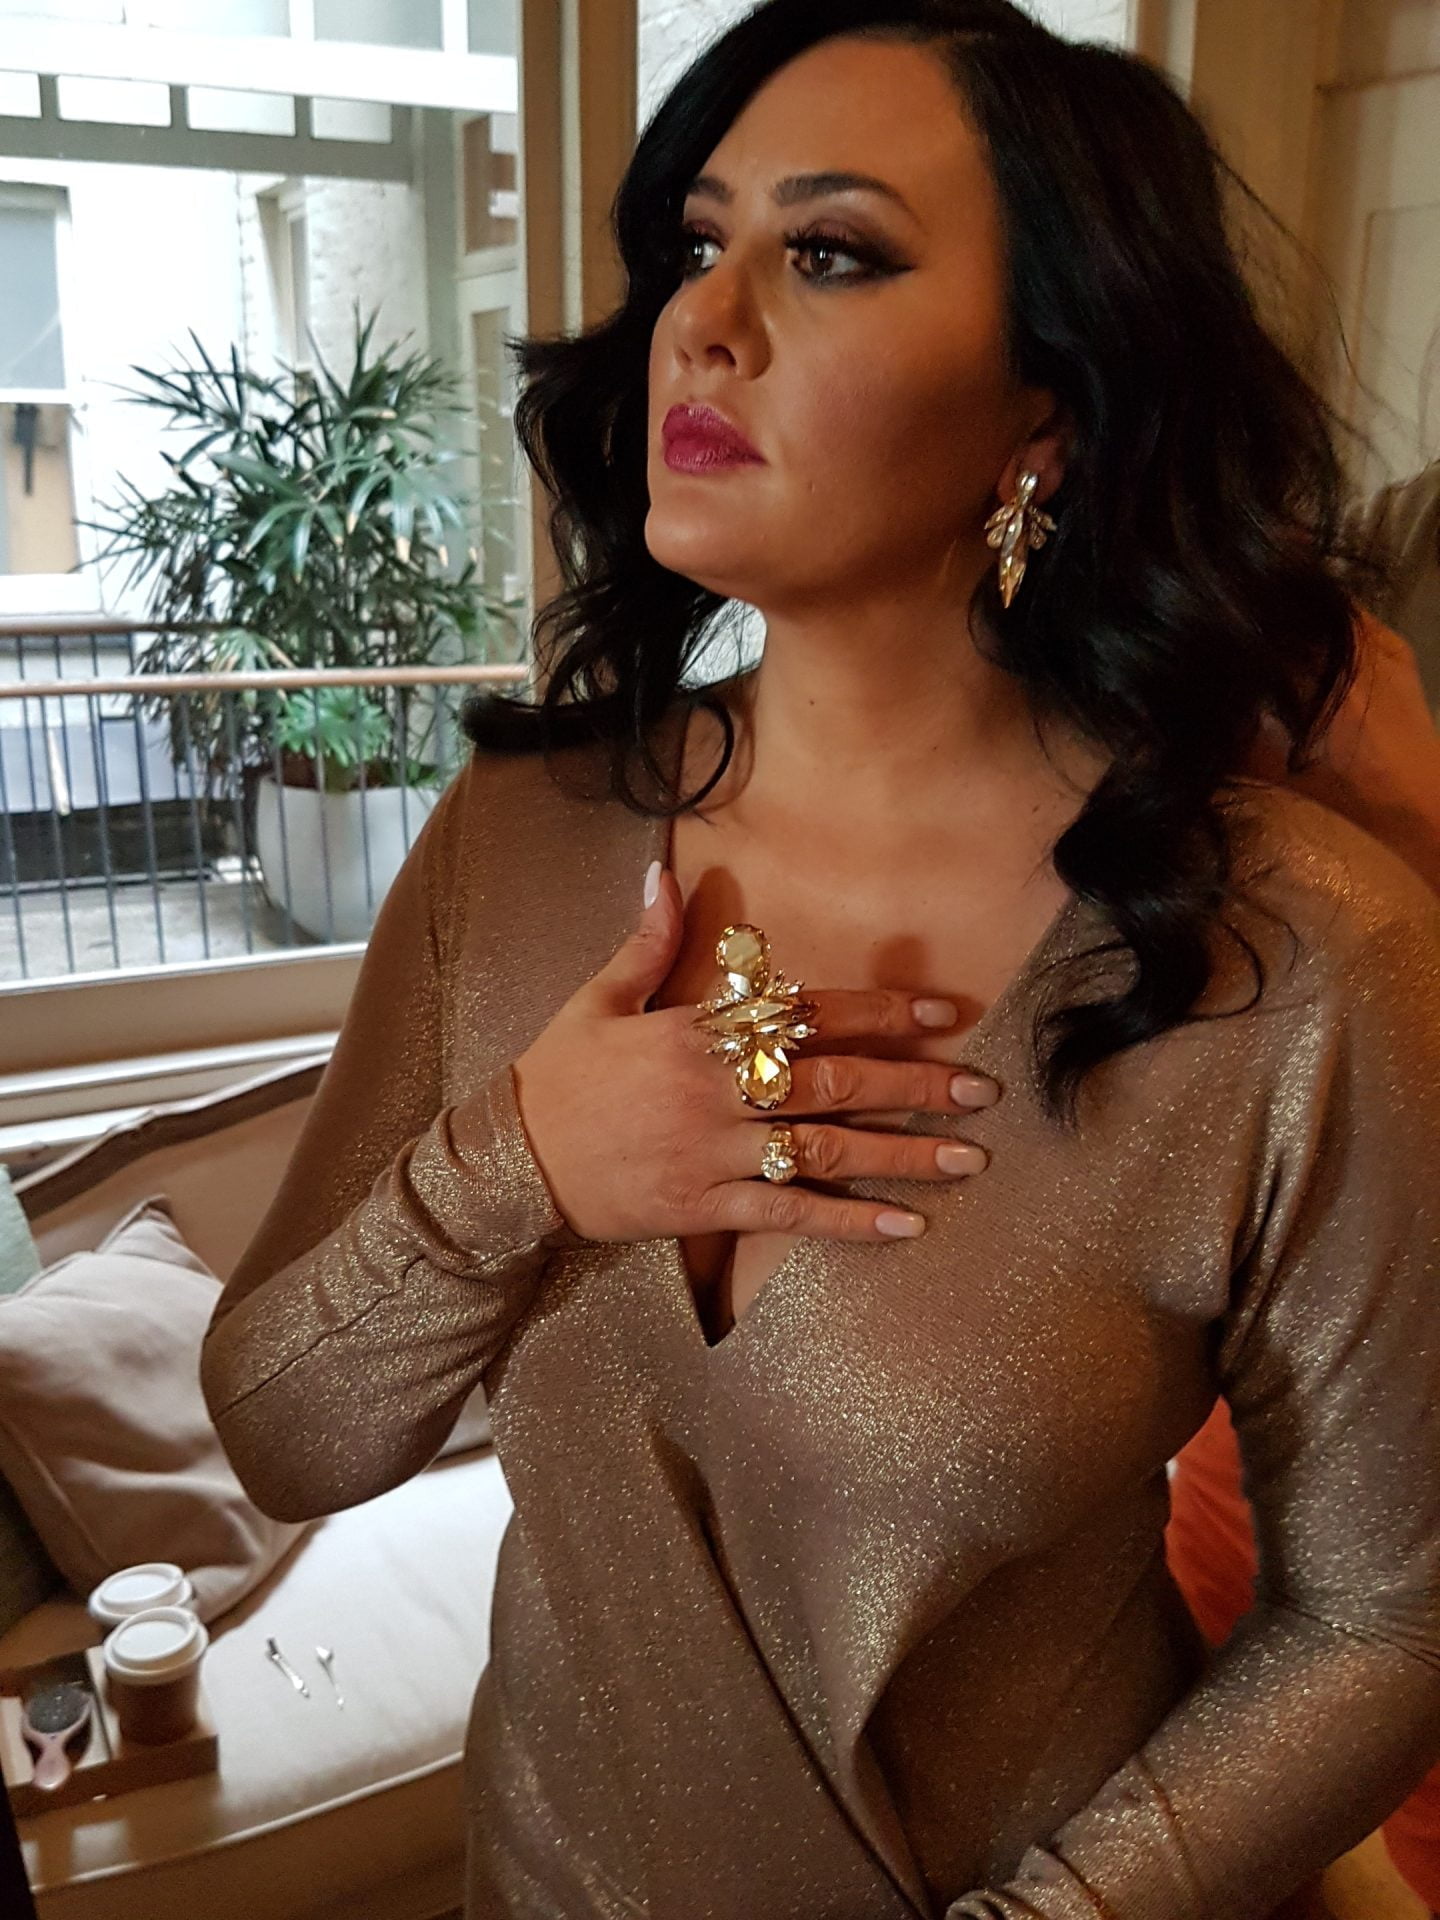 Lydia Schivaello, Real Housewives of Melbourne, photoshoot wearing Redki Couture Jewellery